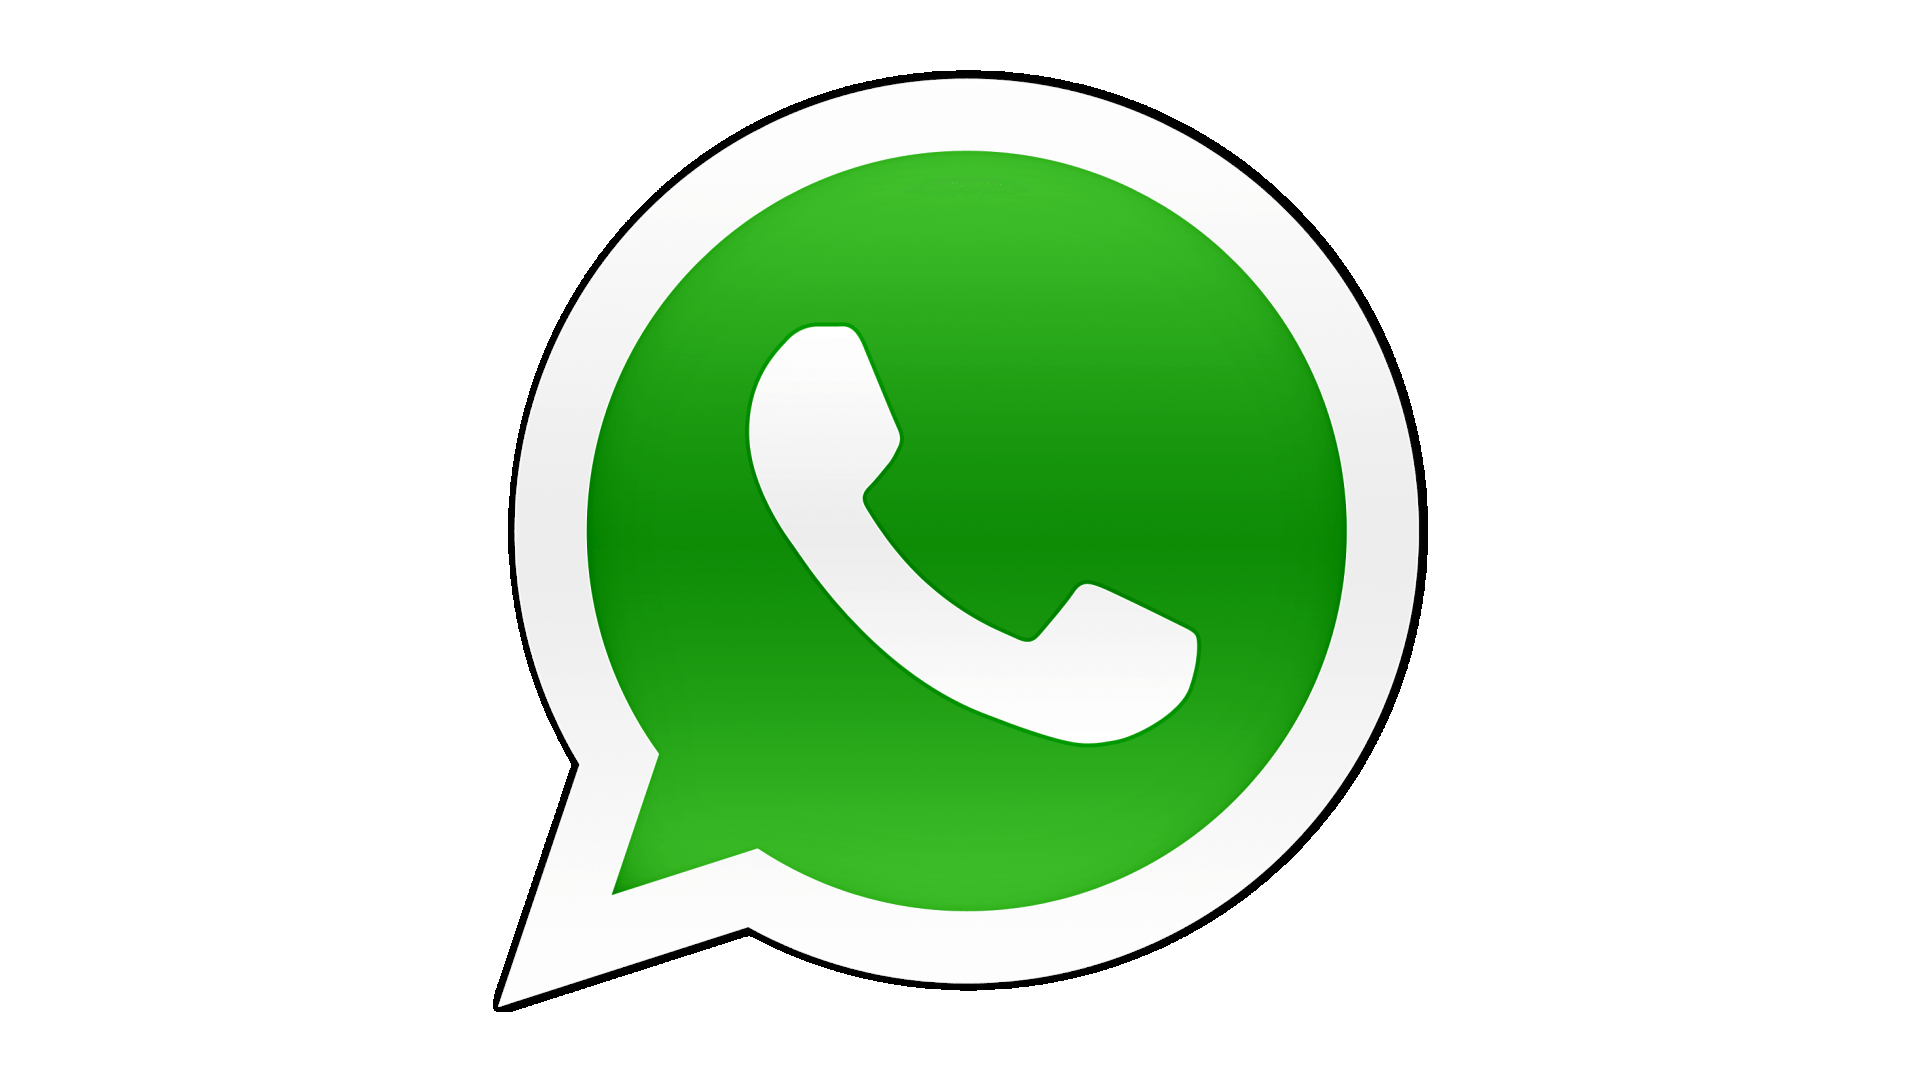 Leave Logo - WhatsApp Logo, symbol meaning, History and Evolution